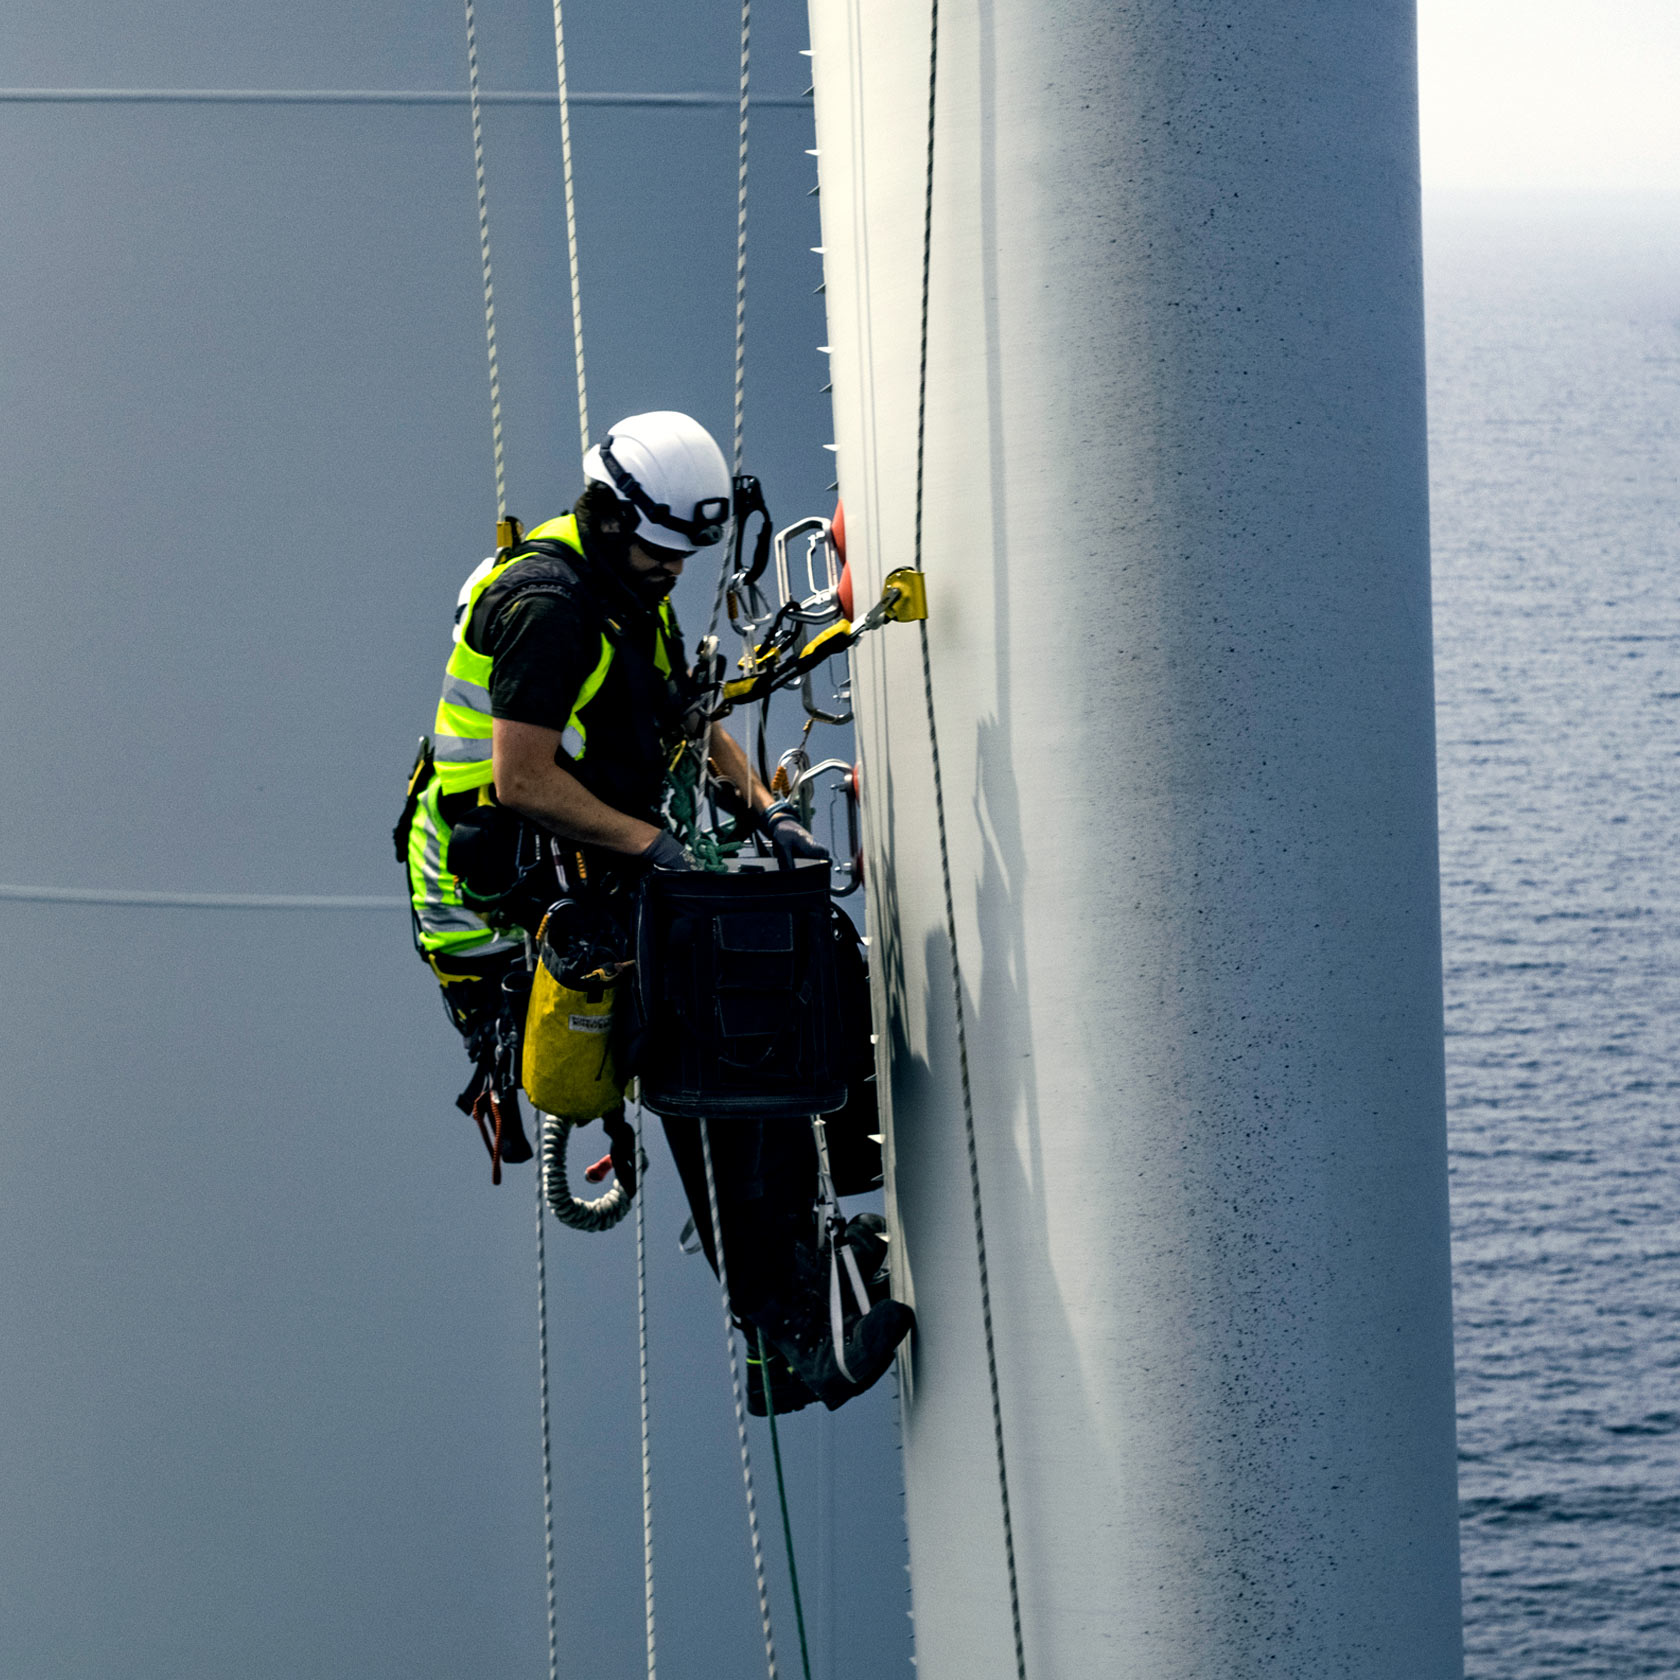 Man in safety gear on a offshore wind turbine blade